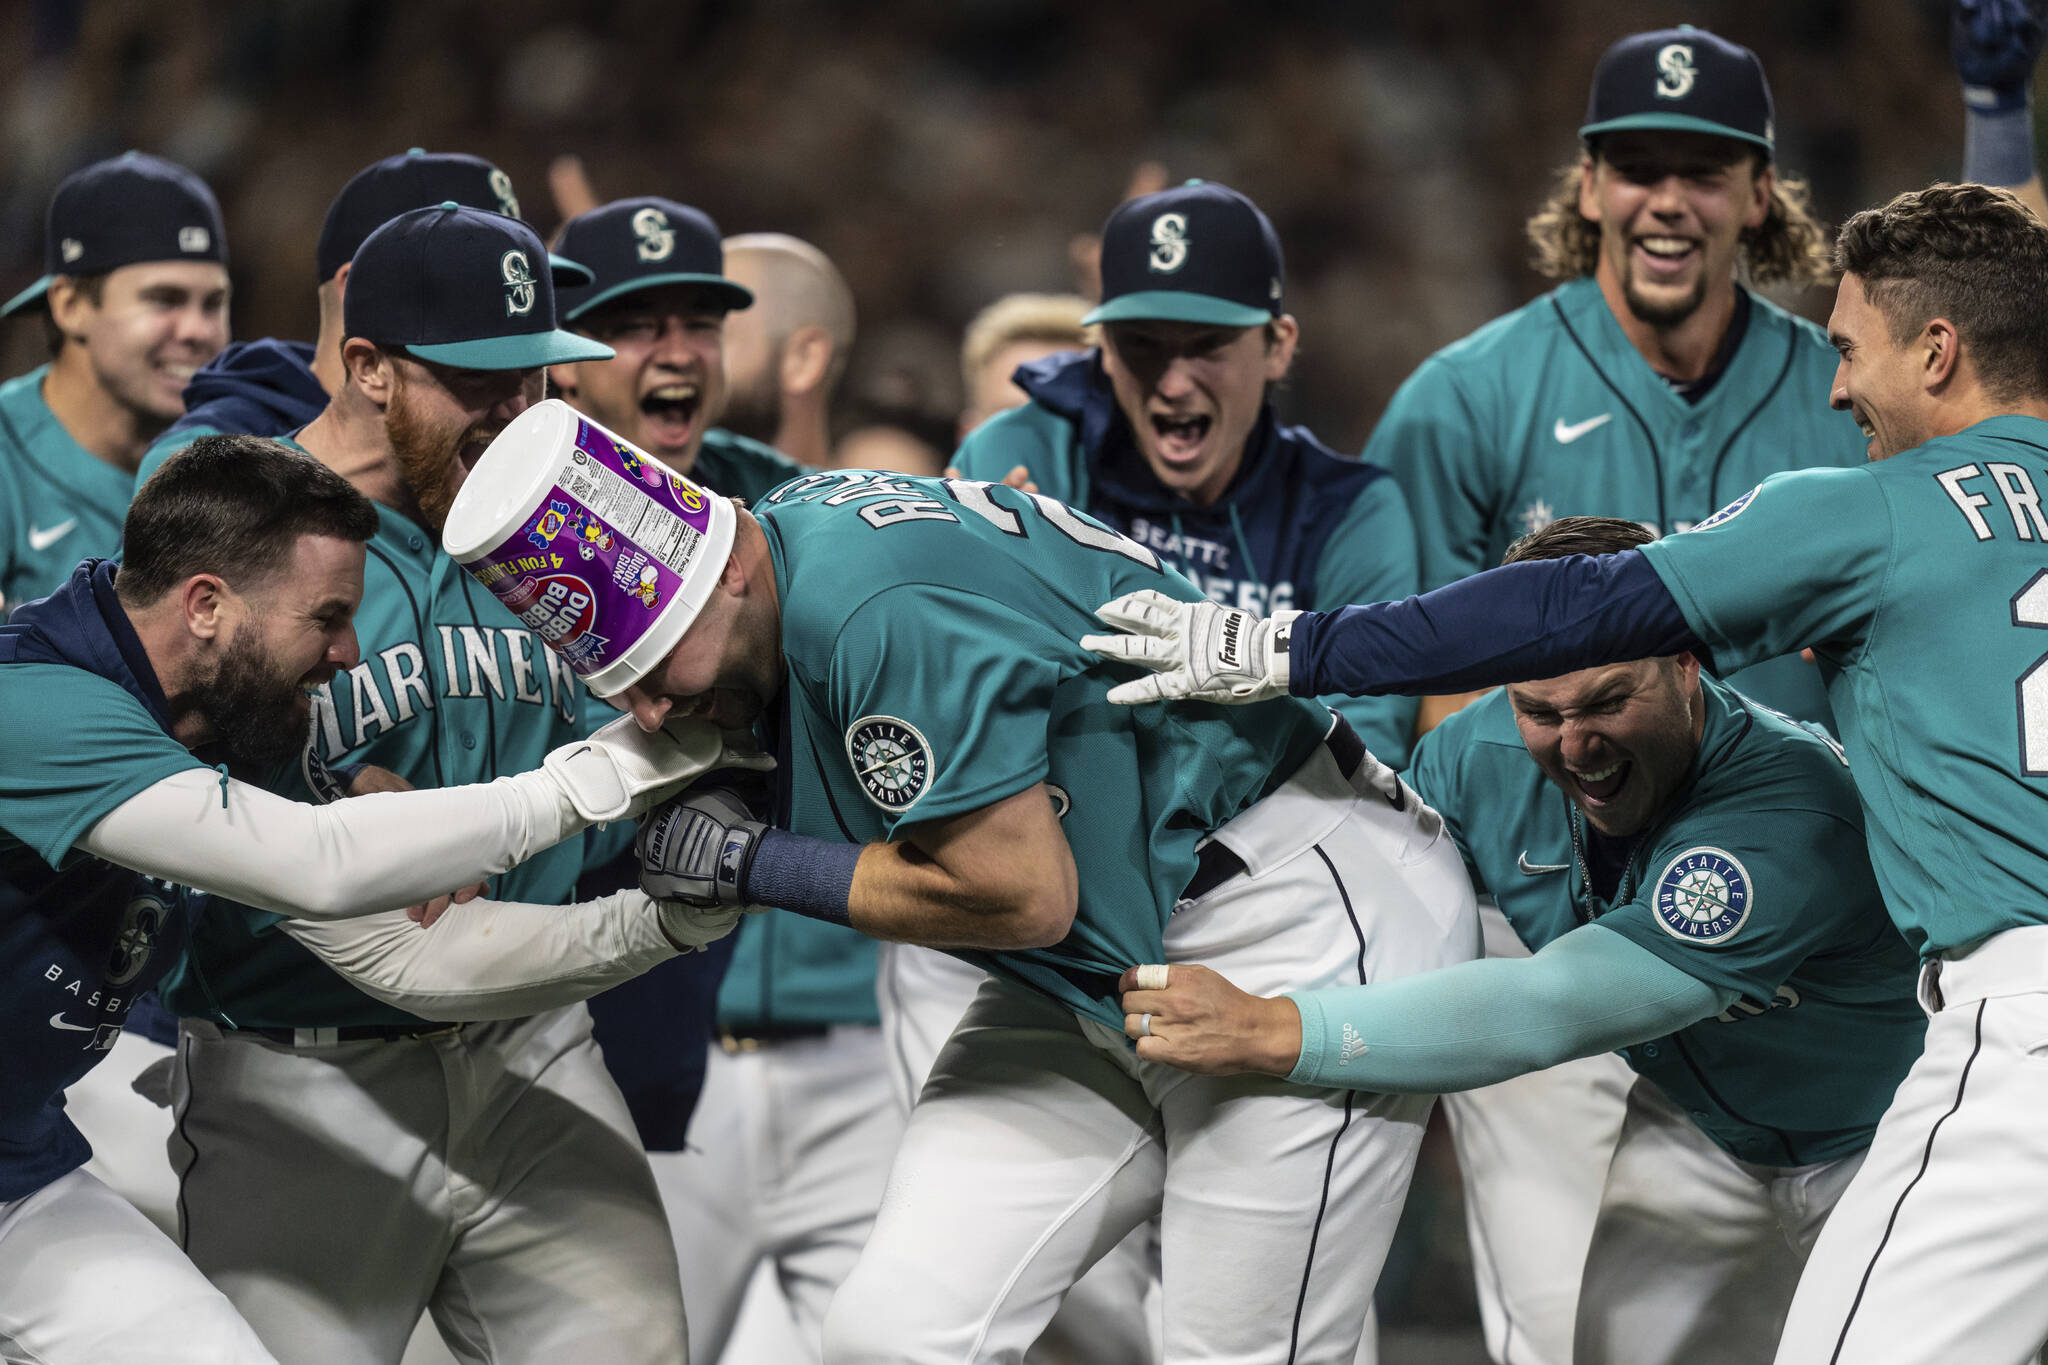 Seattle Mariners including Jesse Winker, left; Ty France, third from right; Logan Gilbert, second from right; and Adam Frazier, right celebrate a home run by Cal Raleigh in ninth inning of a baseball game against the Oakland Athletics, Friday, Sept. 30, 2022, in Seattle. The Mariners won 2-1 to clinch a spot in the playoffs. (AP Photo/Stephen Brashear)